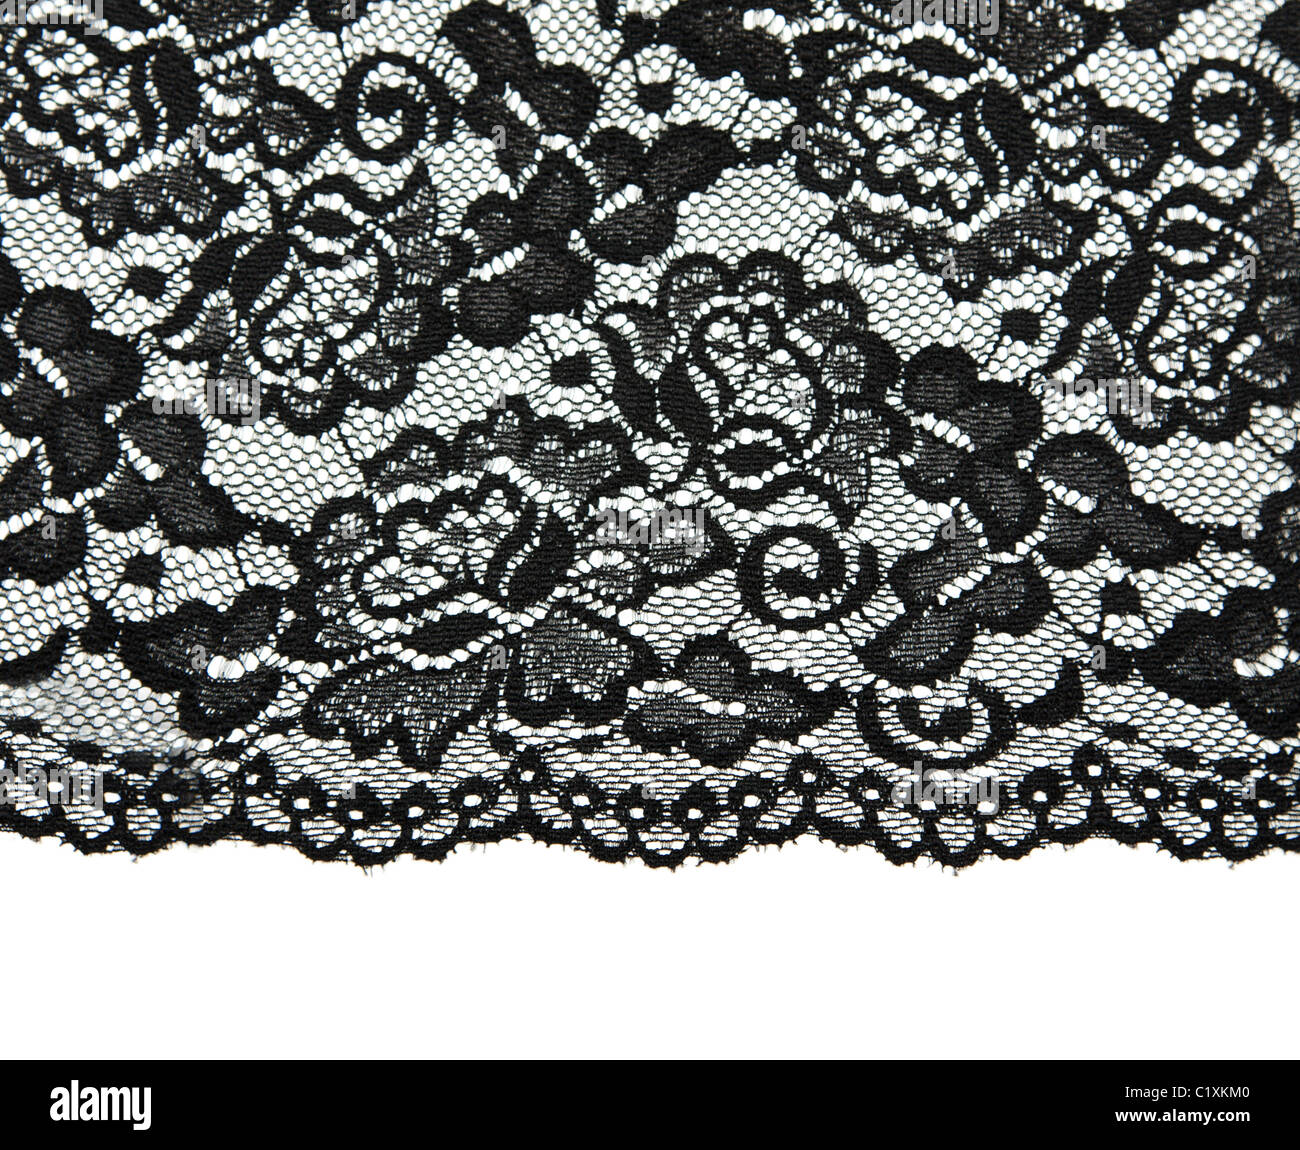 873,996 Lace Fabric Images, Stock Photos, 3D objects, & Vectors